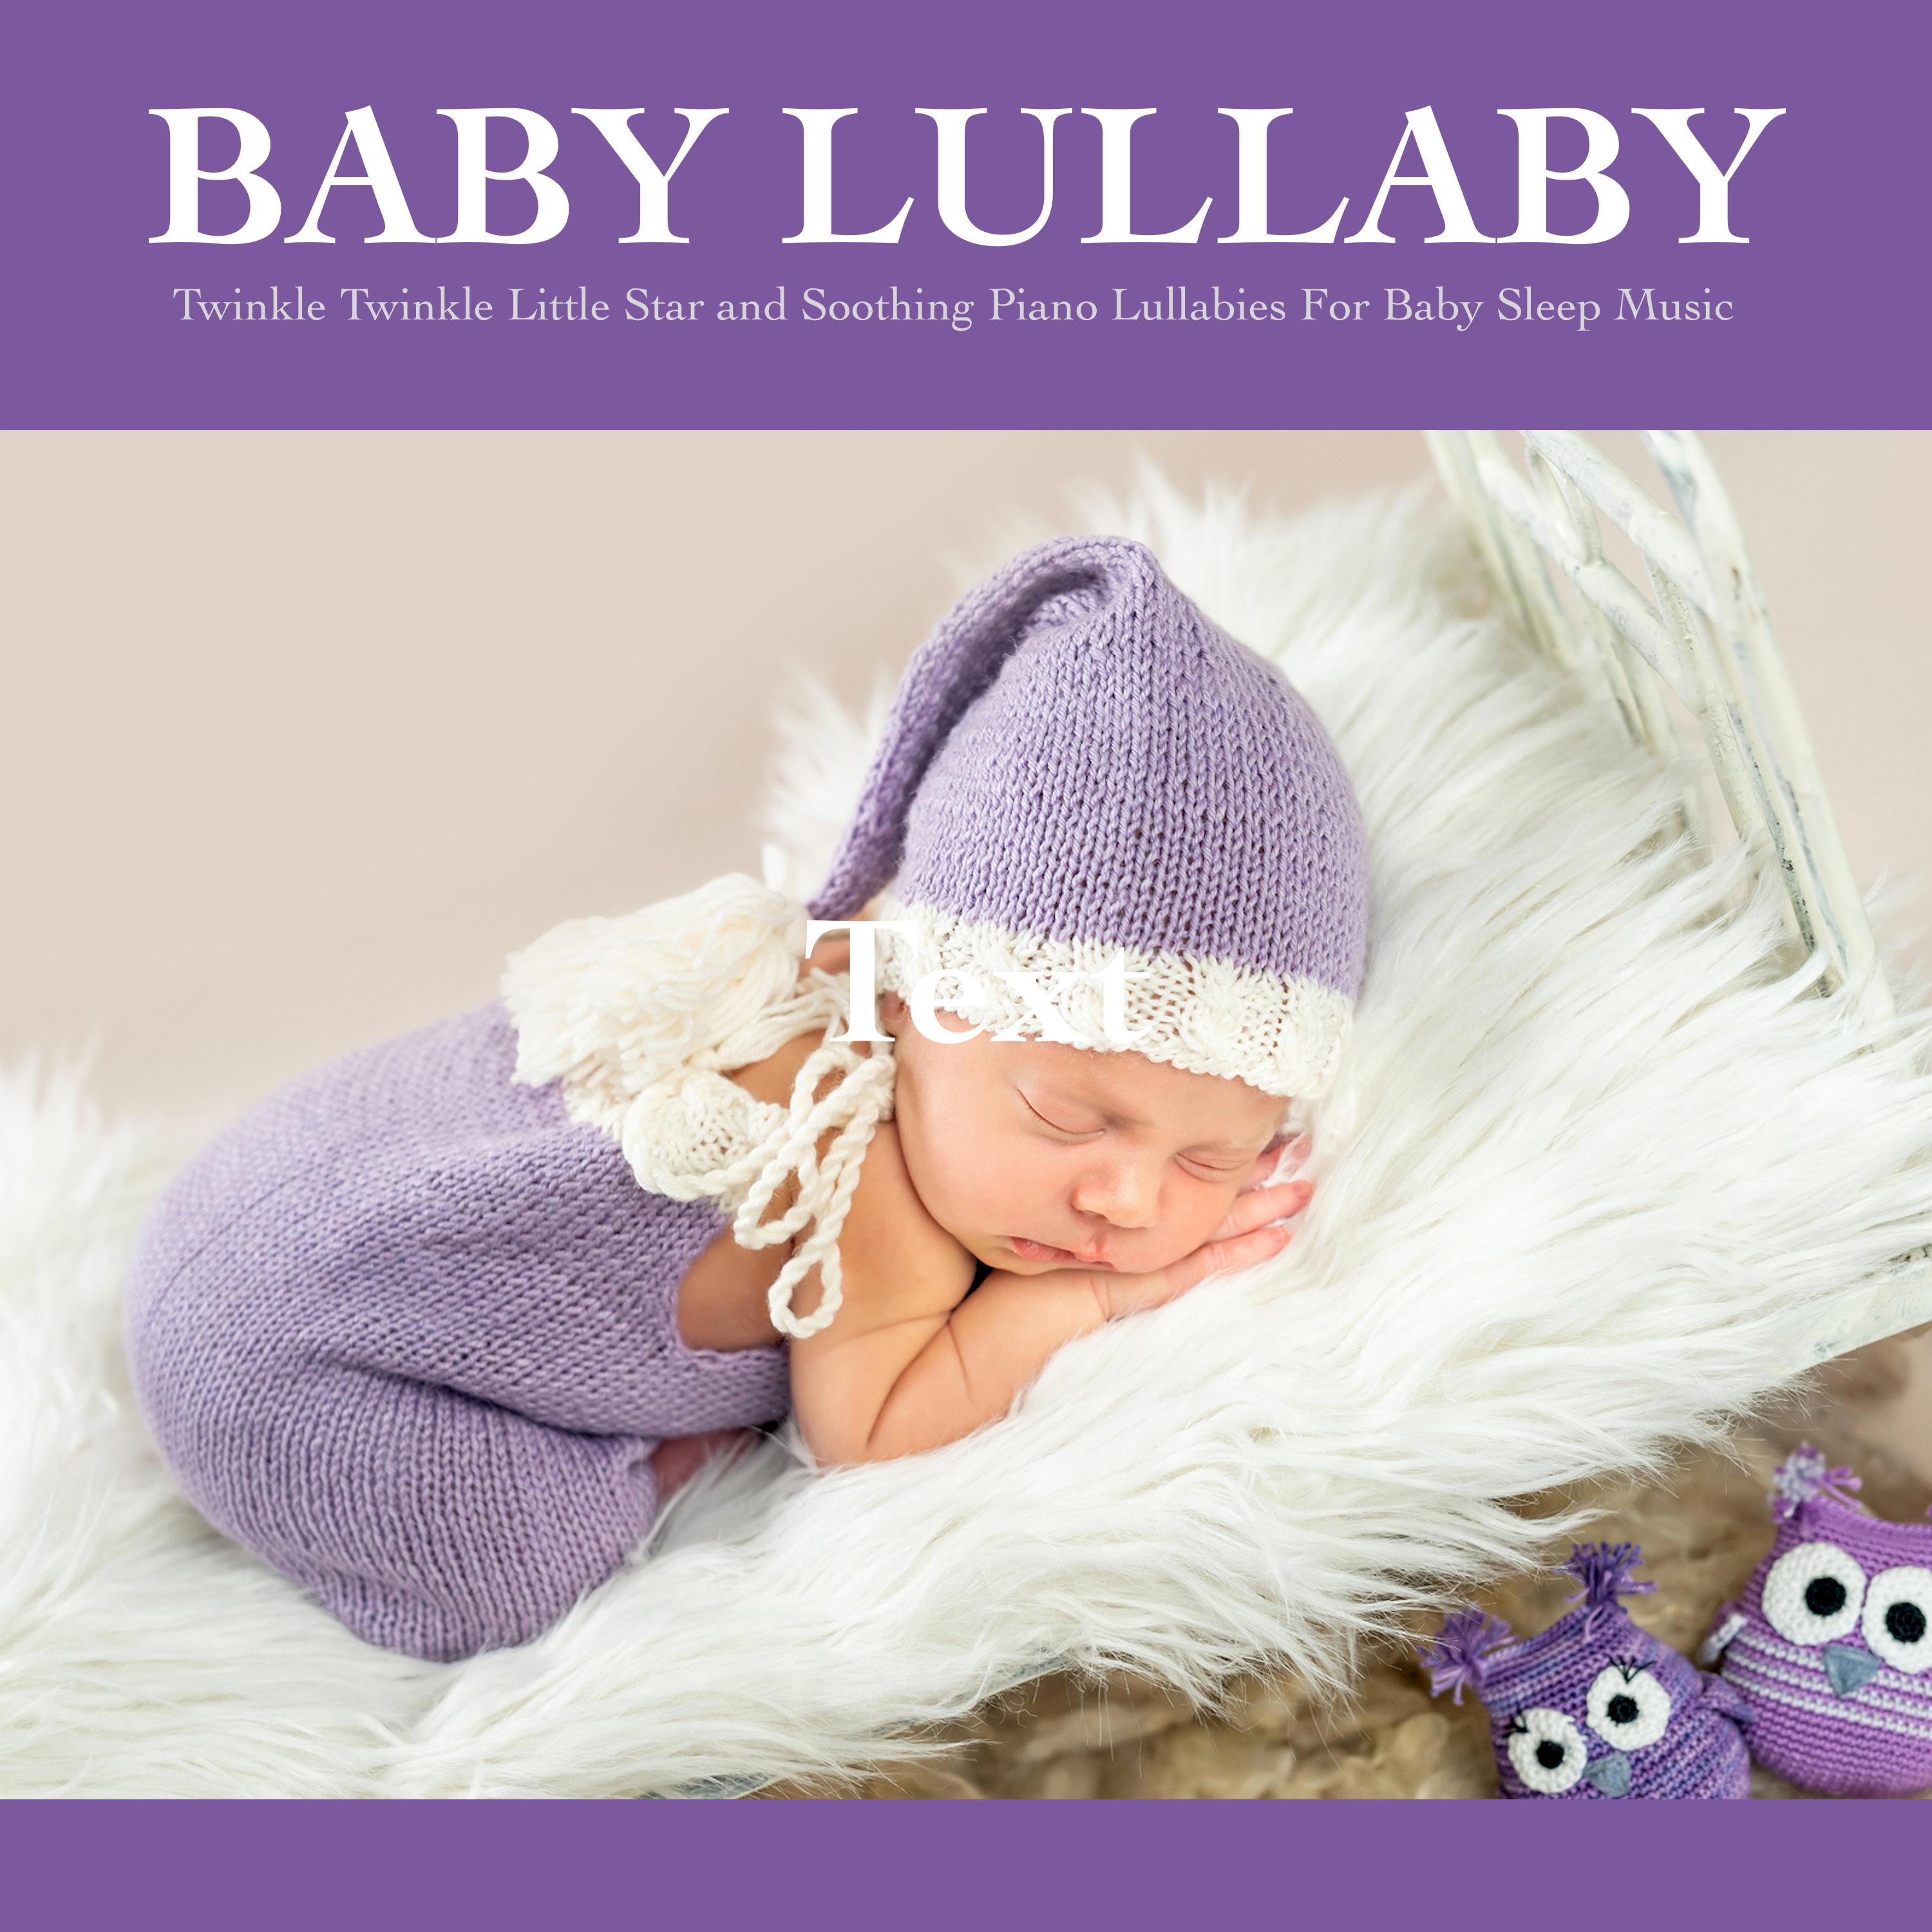 Baby Lullaby: Twinkle Twinkle Little Star and Soothing Piano Lullabies For Baby Sleep Music